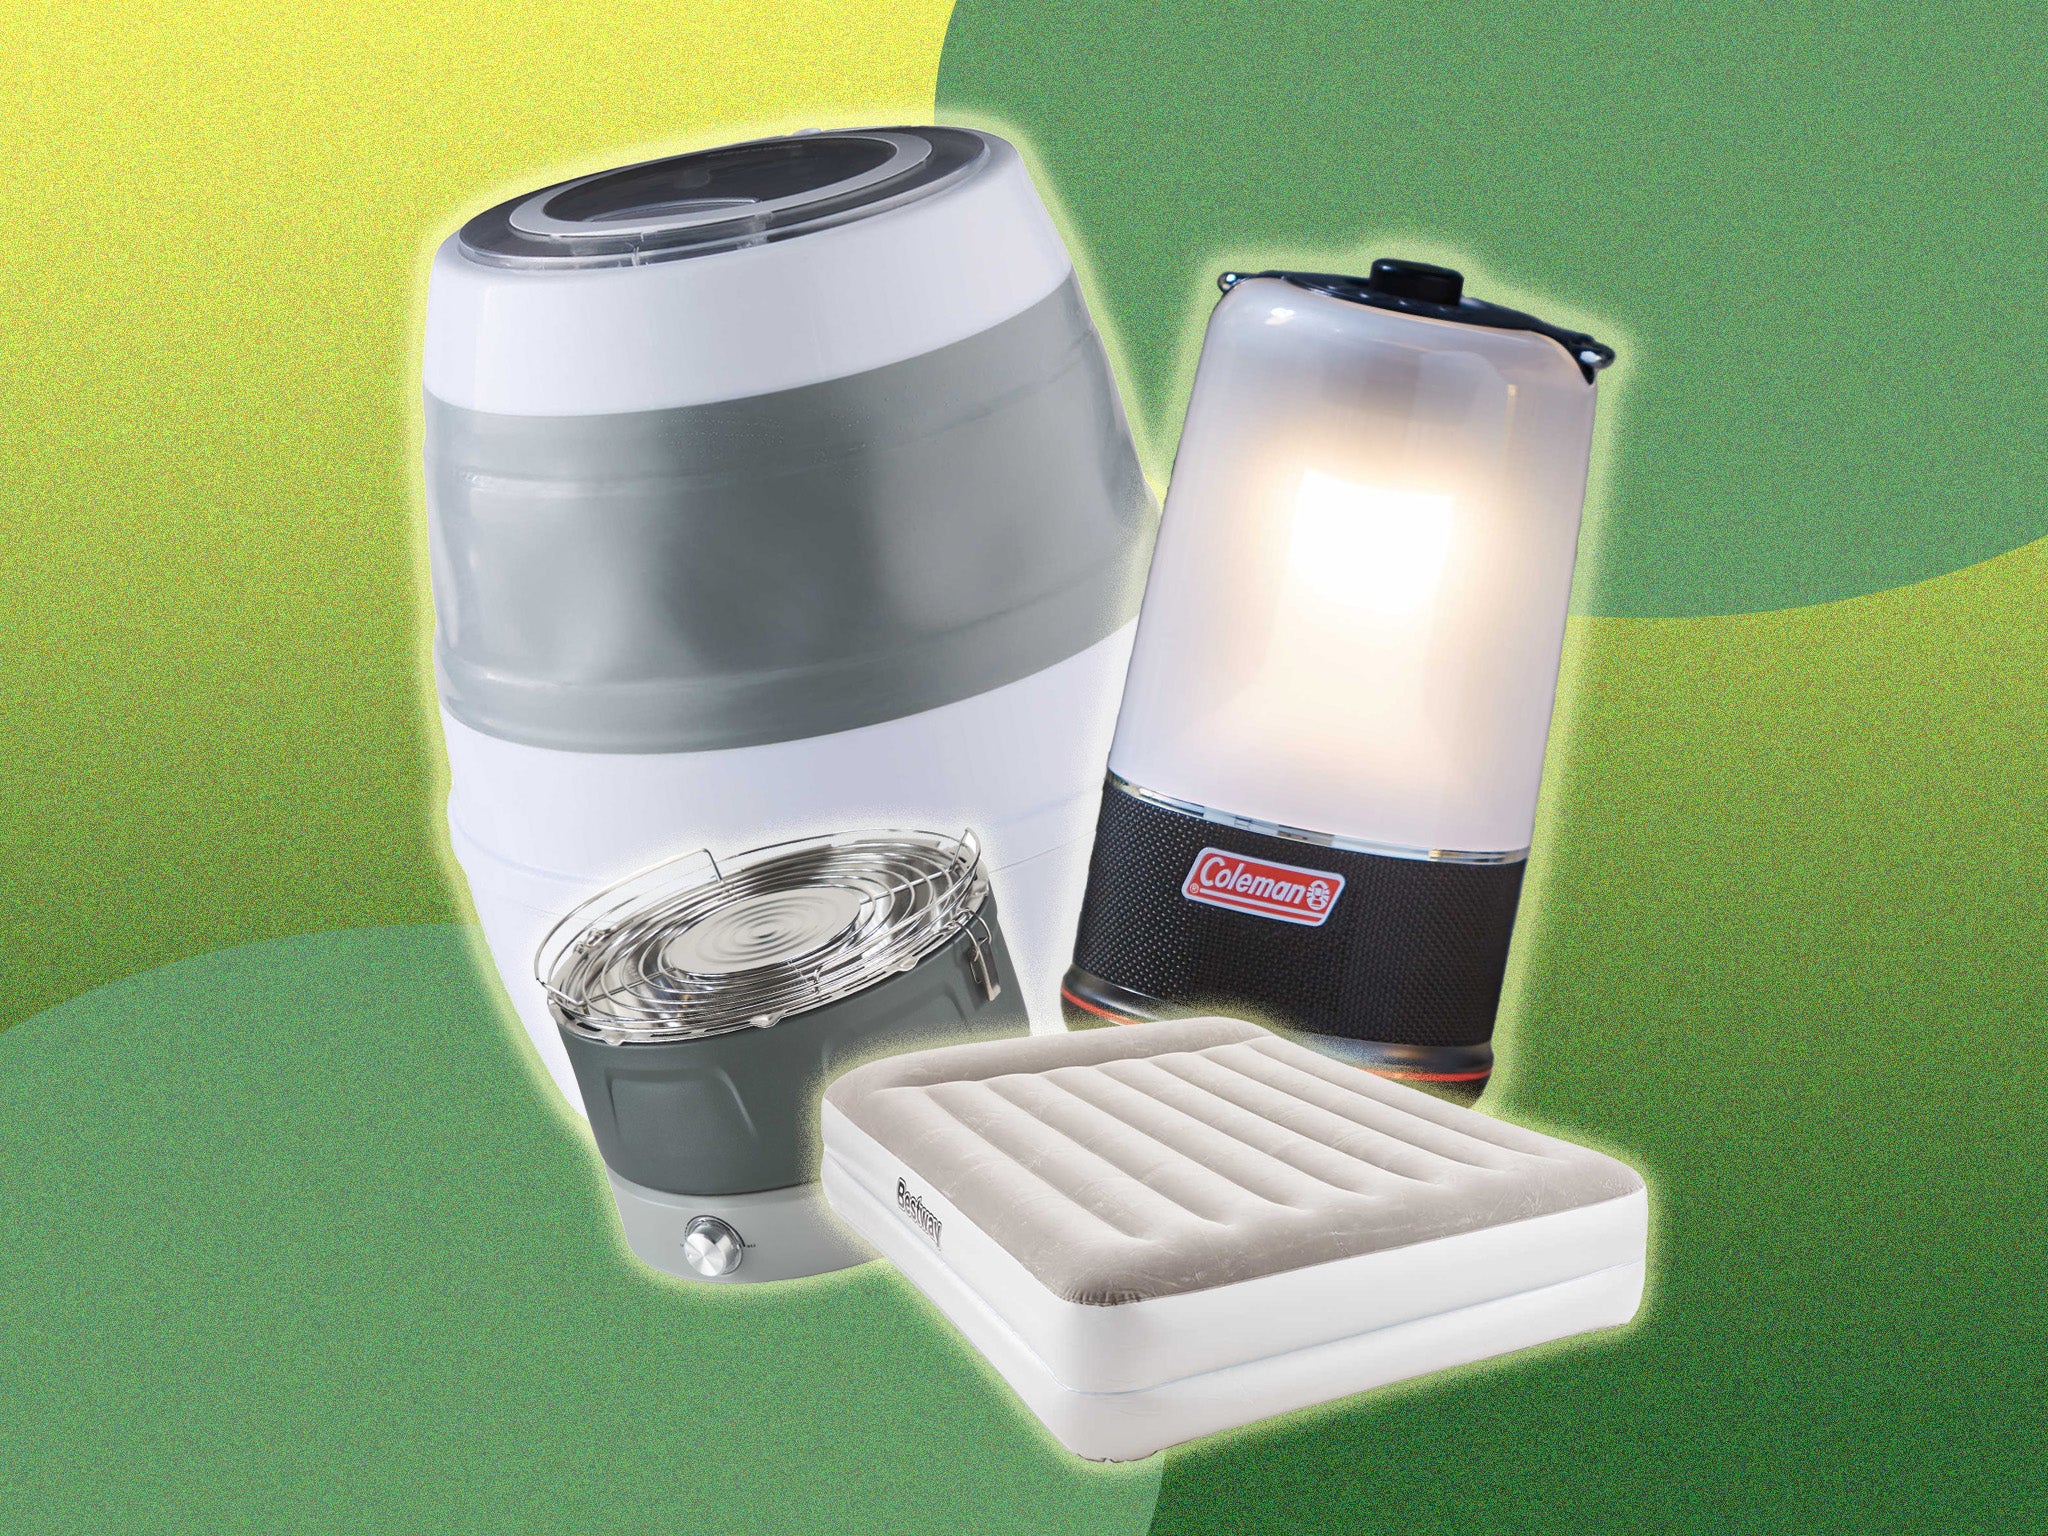 Other outdoor essentials include air beds and a lamp-speaker hybrid